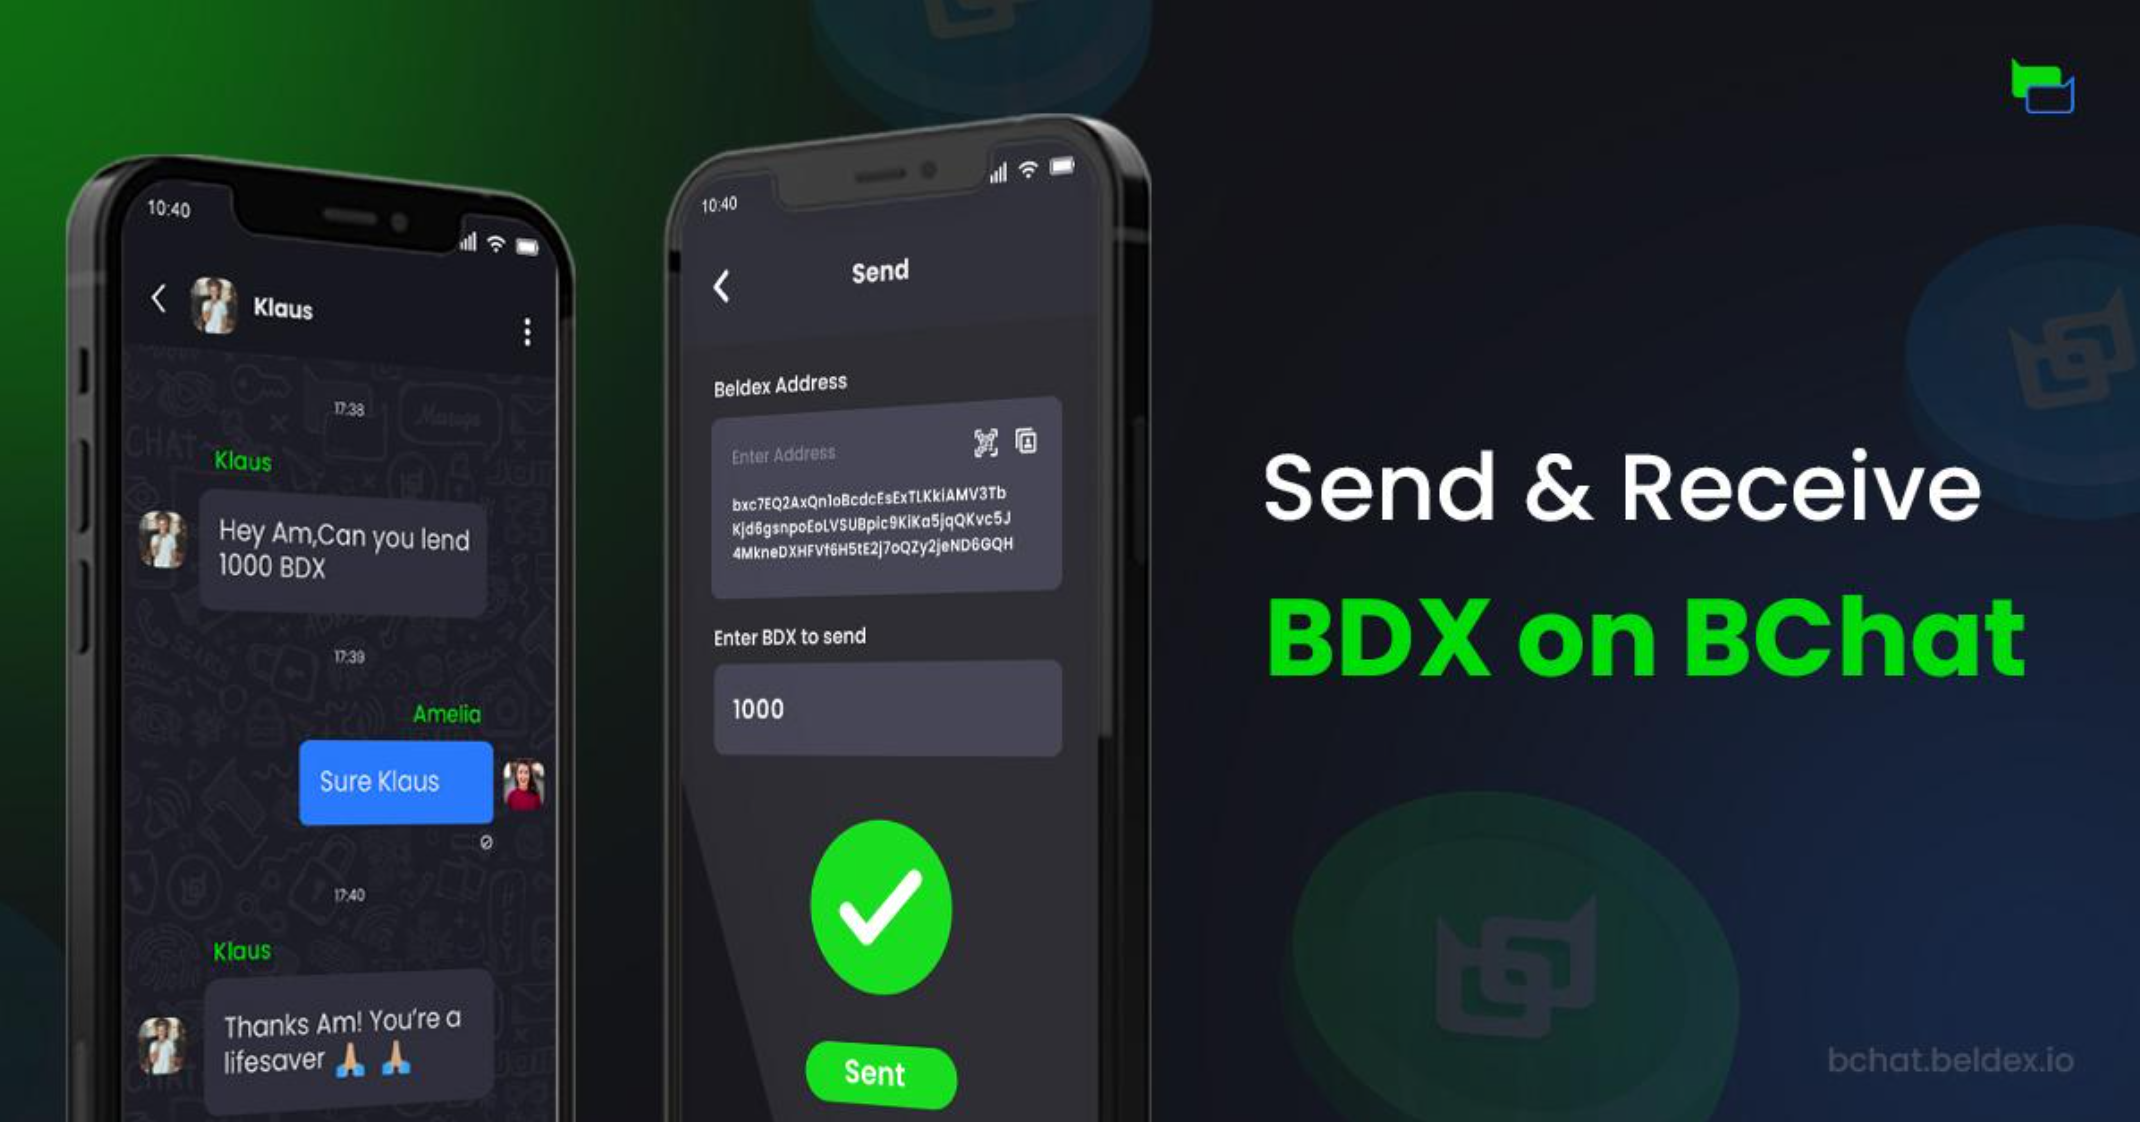 Make Crypto Payments on BChat Web 3.0 Messenger – BChat Integrates Beldex Wallet unsolicited PlatoBlockchain Data Intelligence. Vertical Search. Ai.